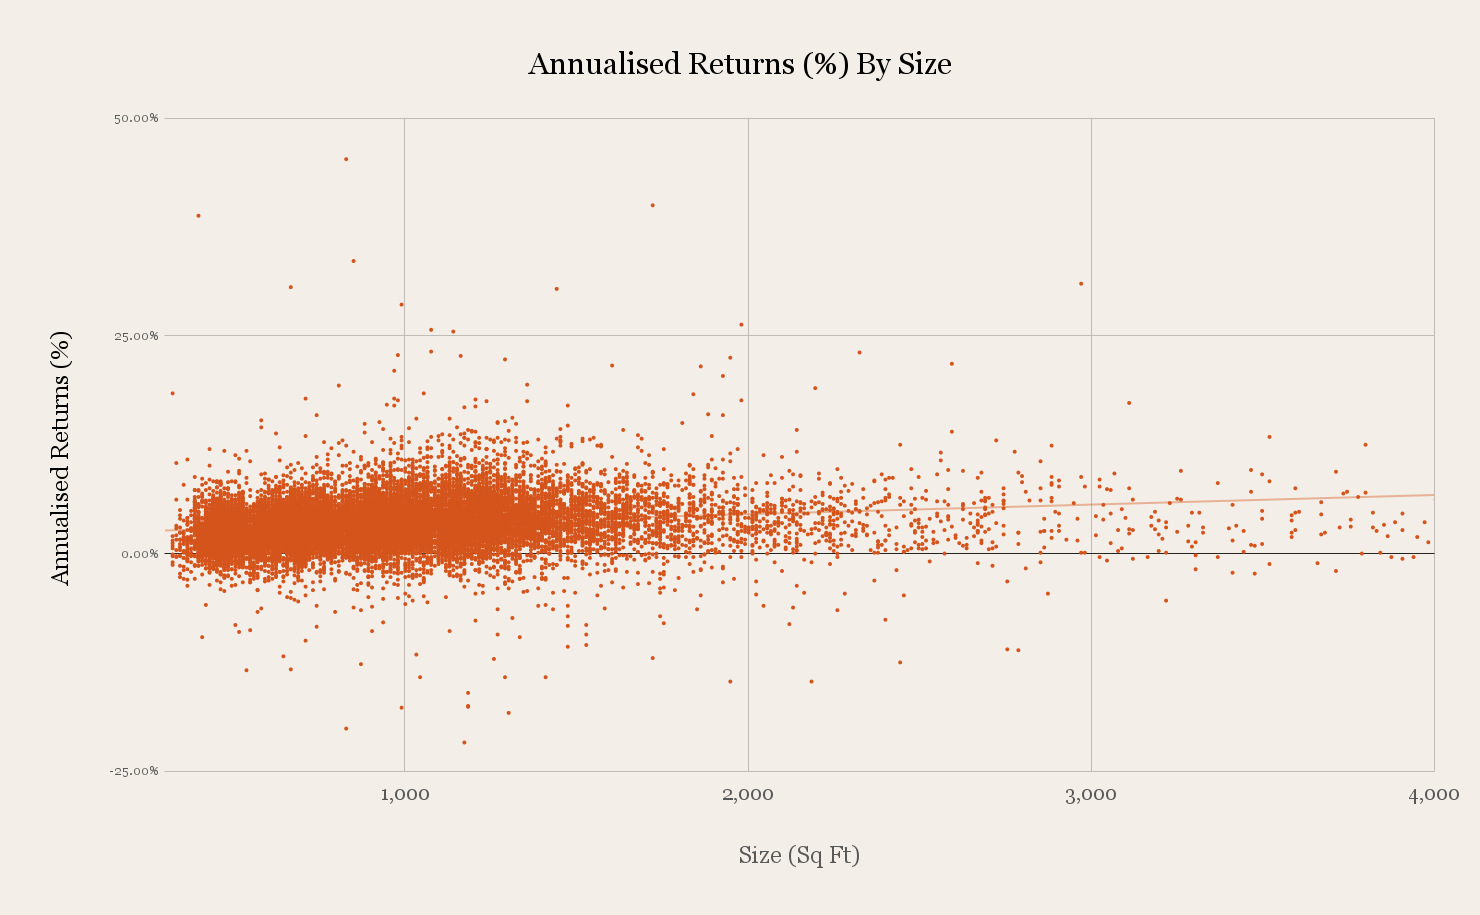 Annualised Returns By Size